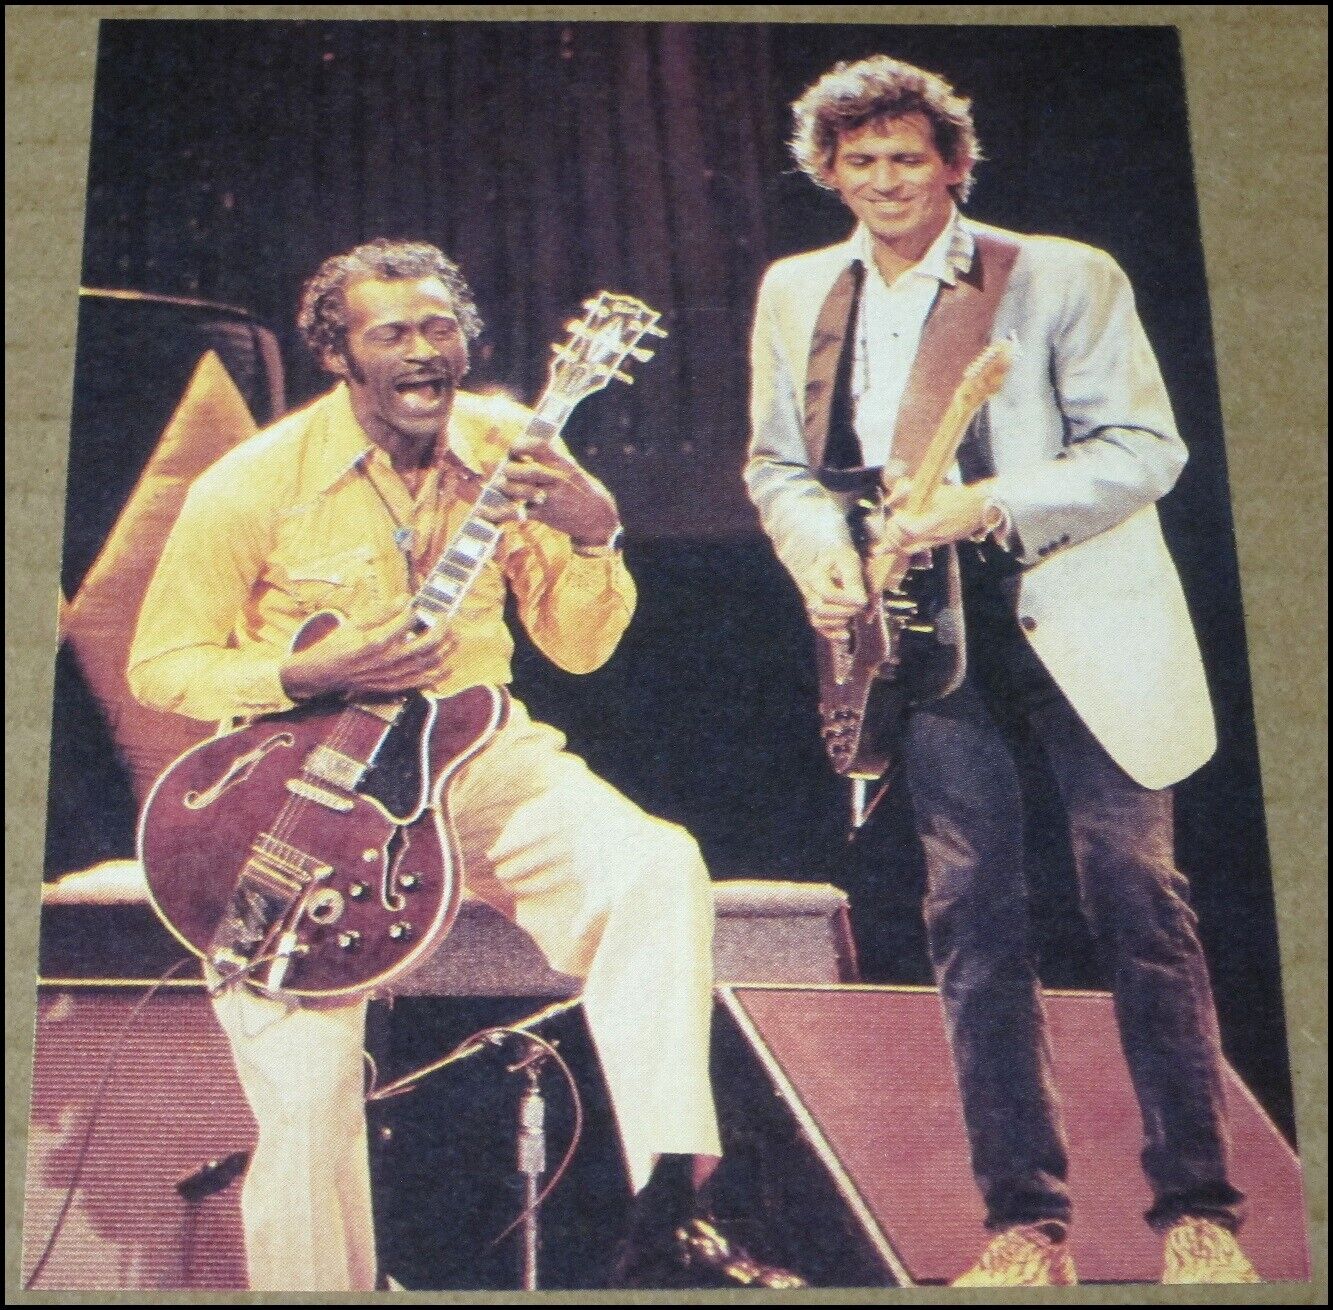 1987 Chuck Berry & Keith Richards Rolling Stone Photo Clipping 4.25\